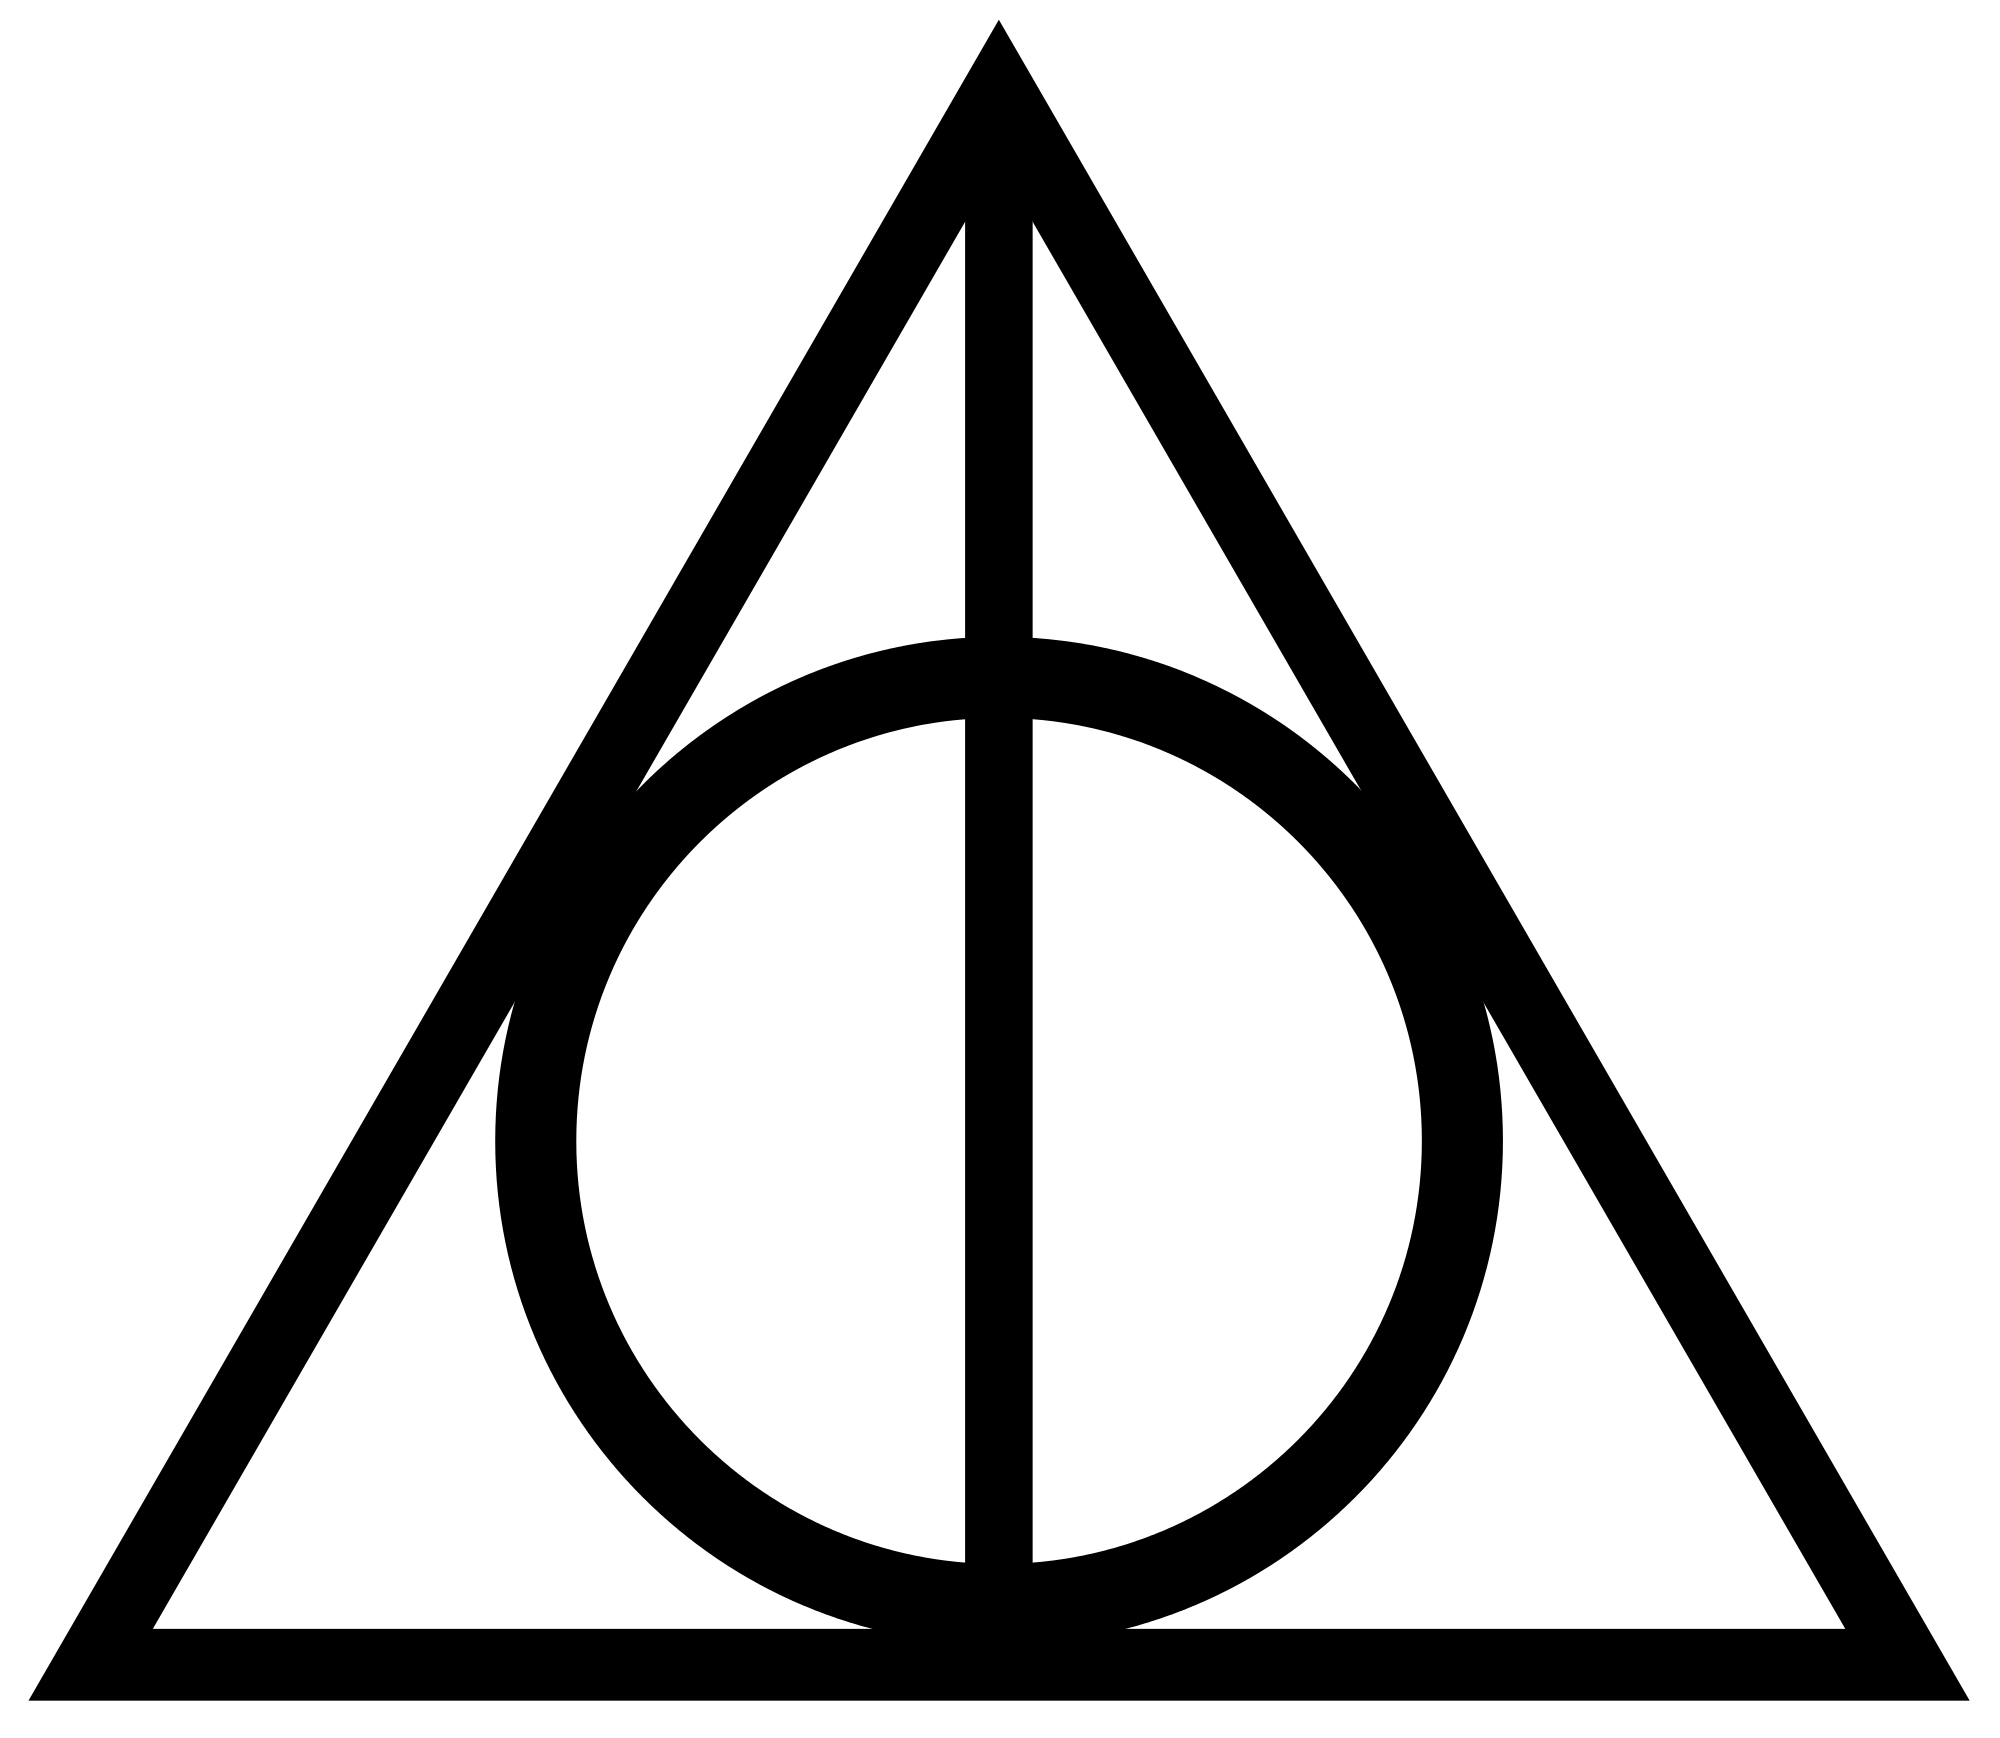 Harry Potter Vector at GetDrawings | Free download